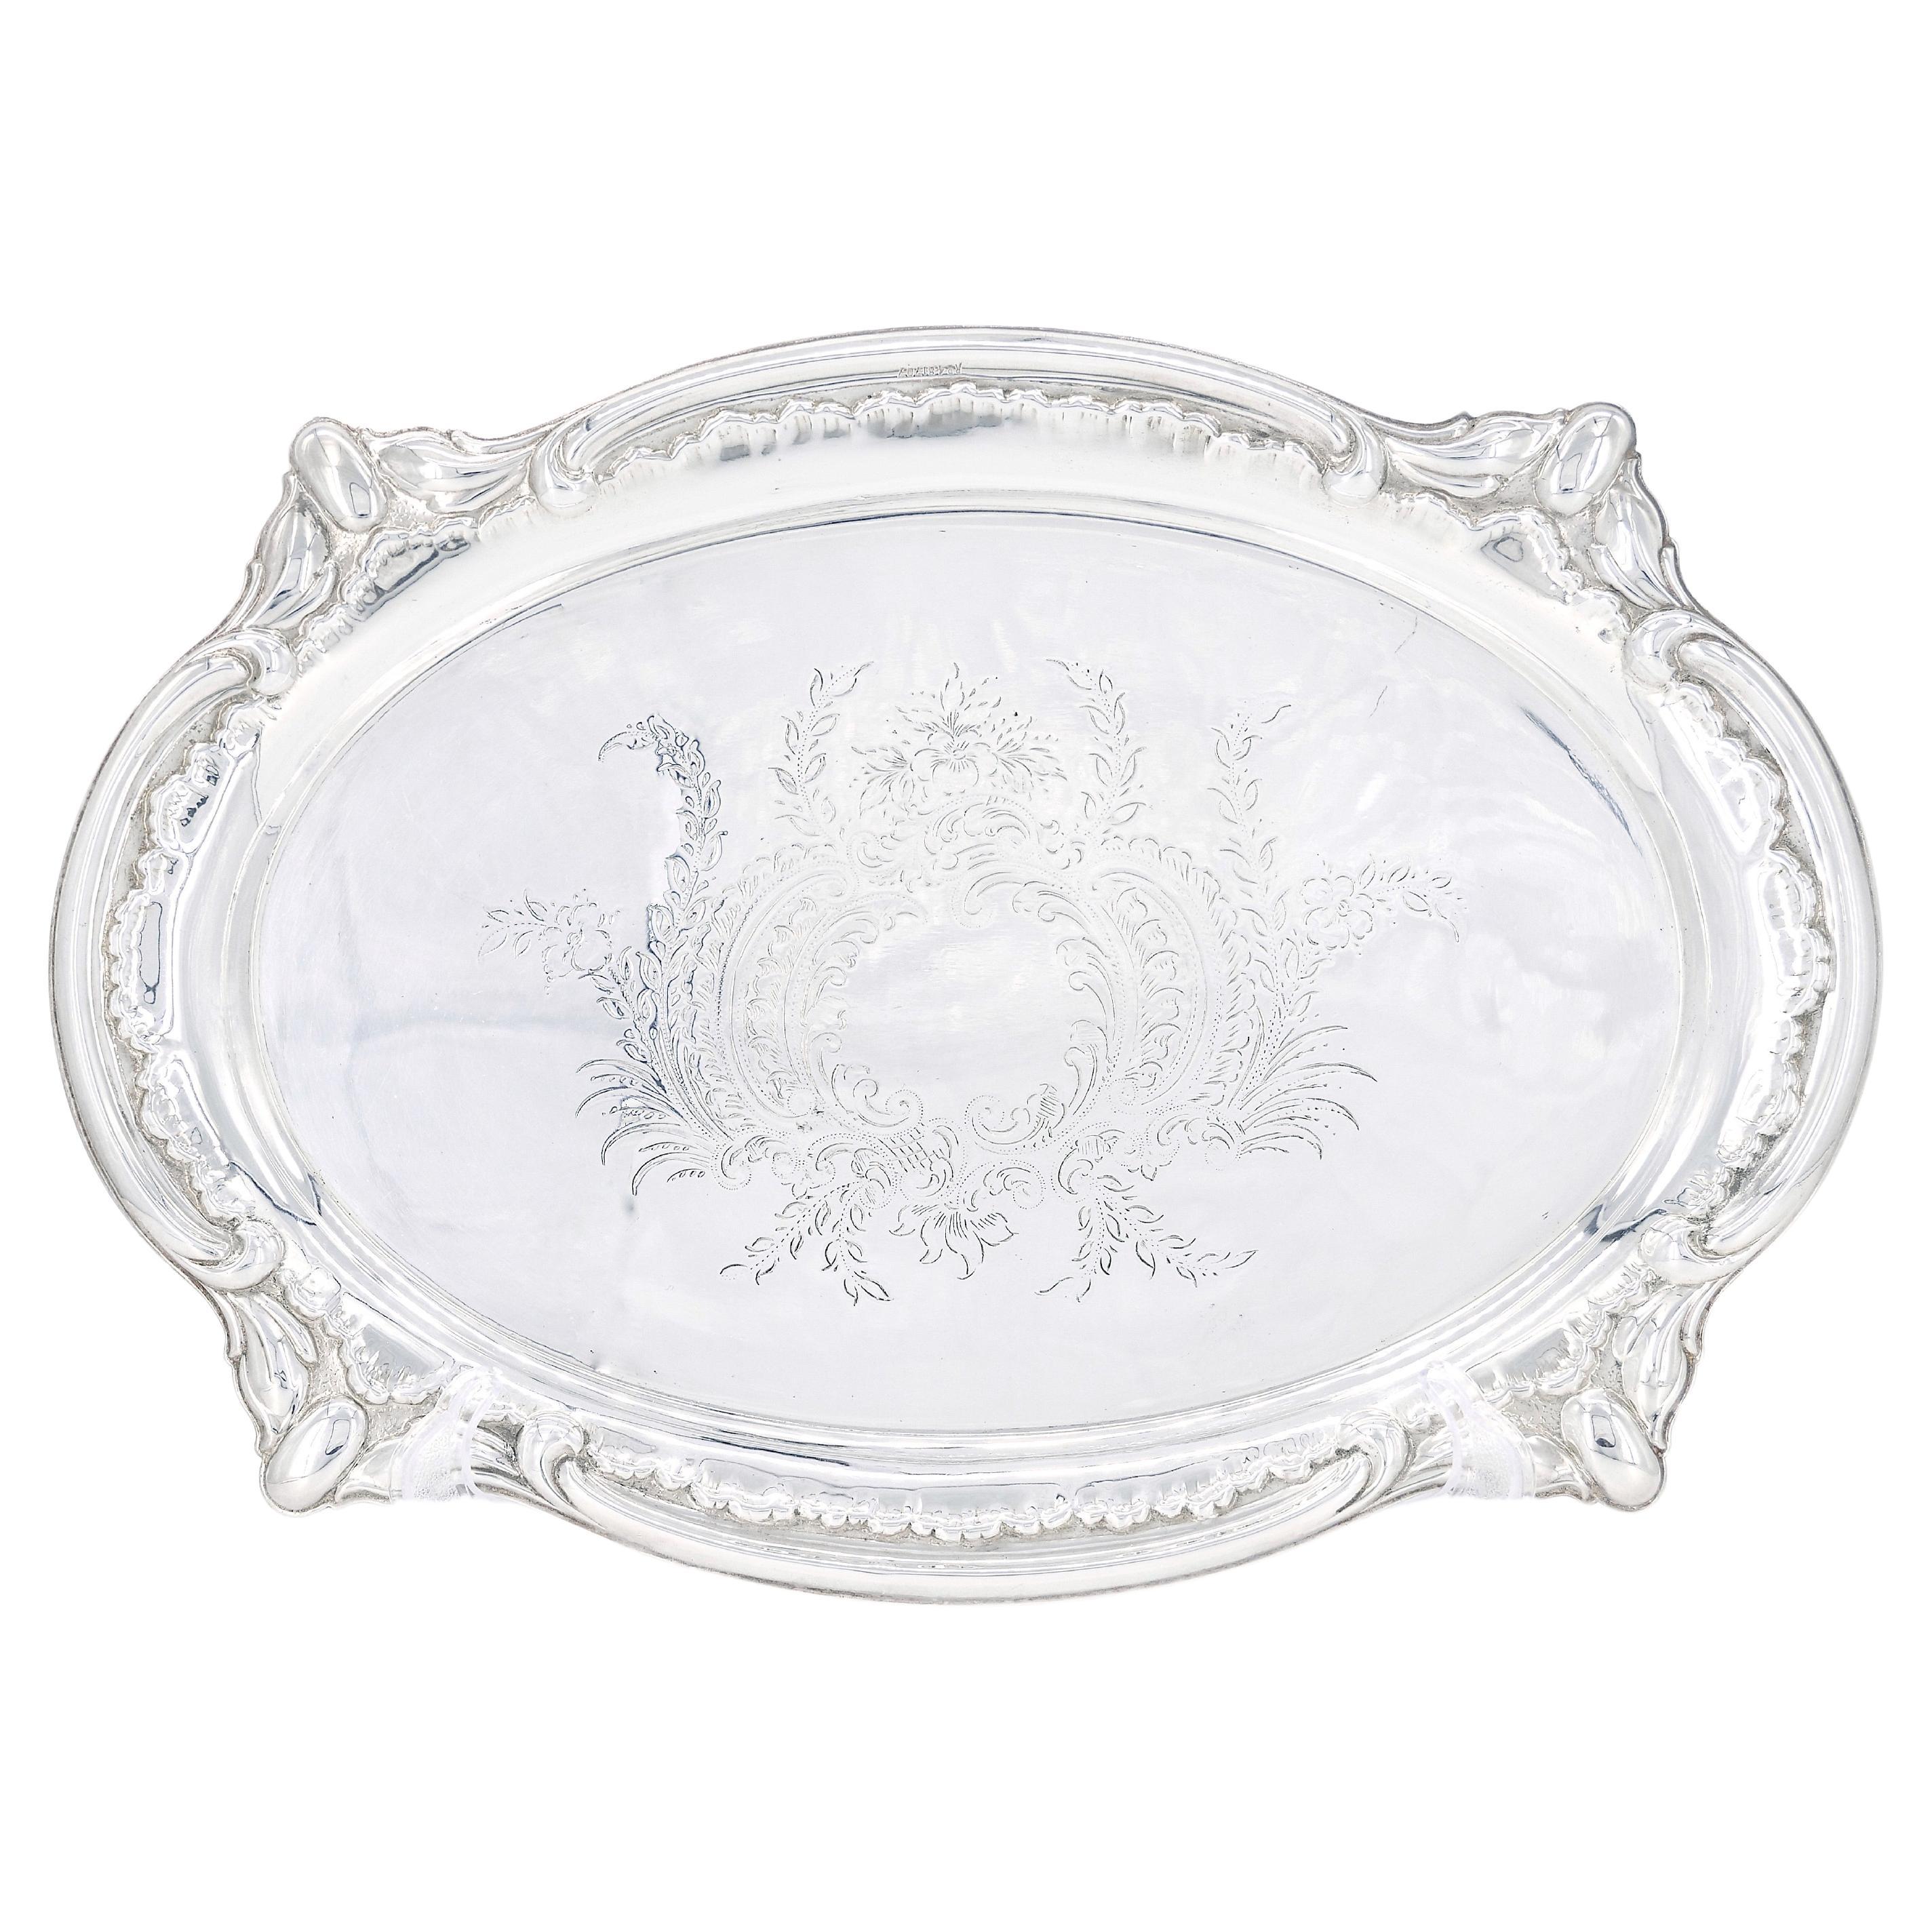 19th Century English Silver Plated Oval Shape Hand Decorated Interior Serving Tray For Sale